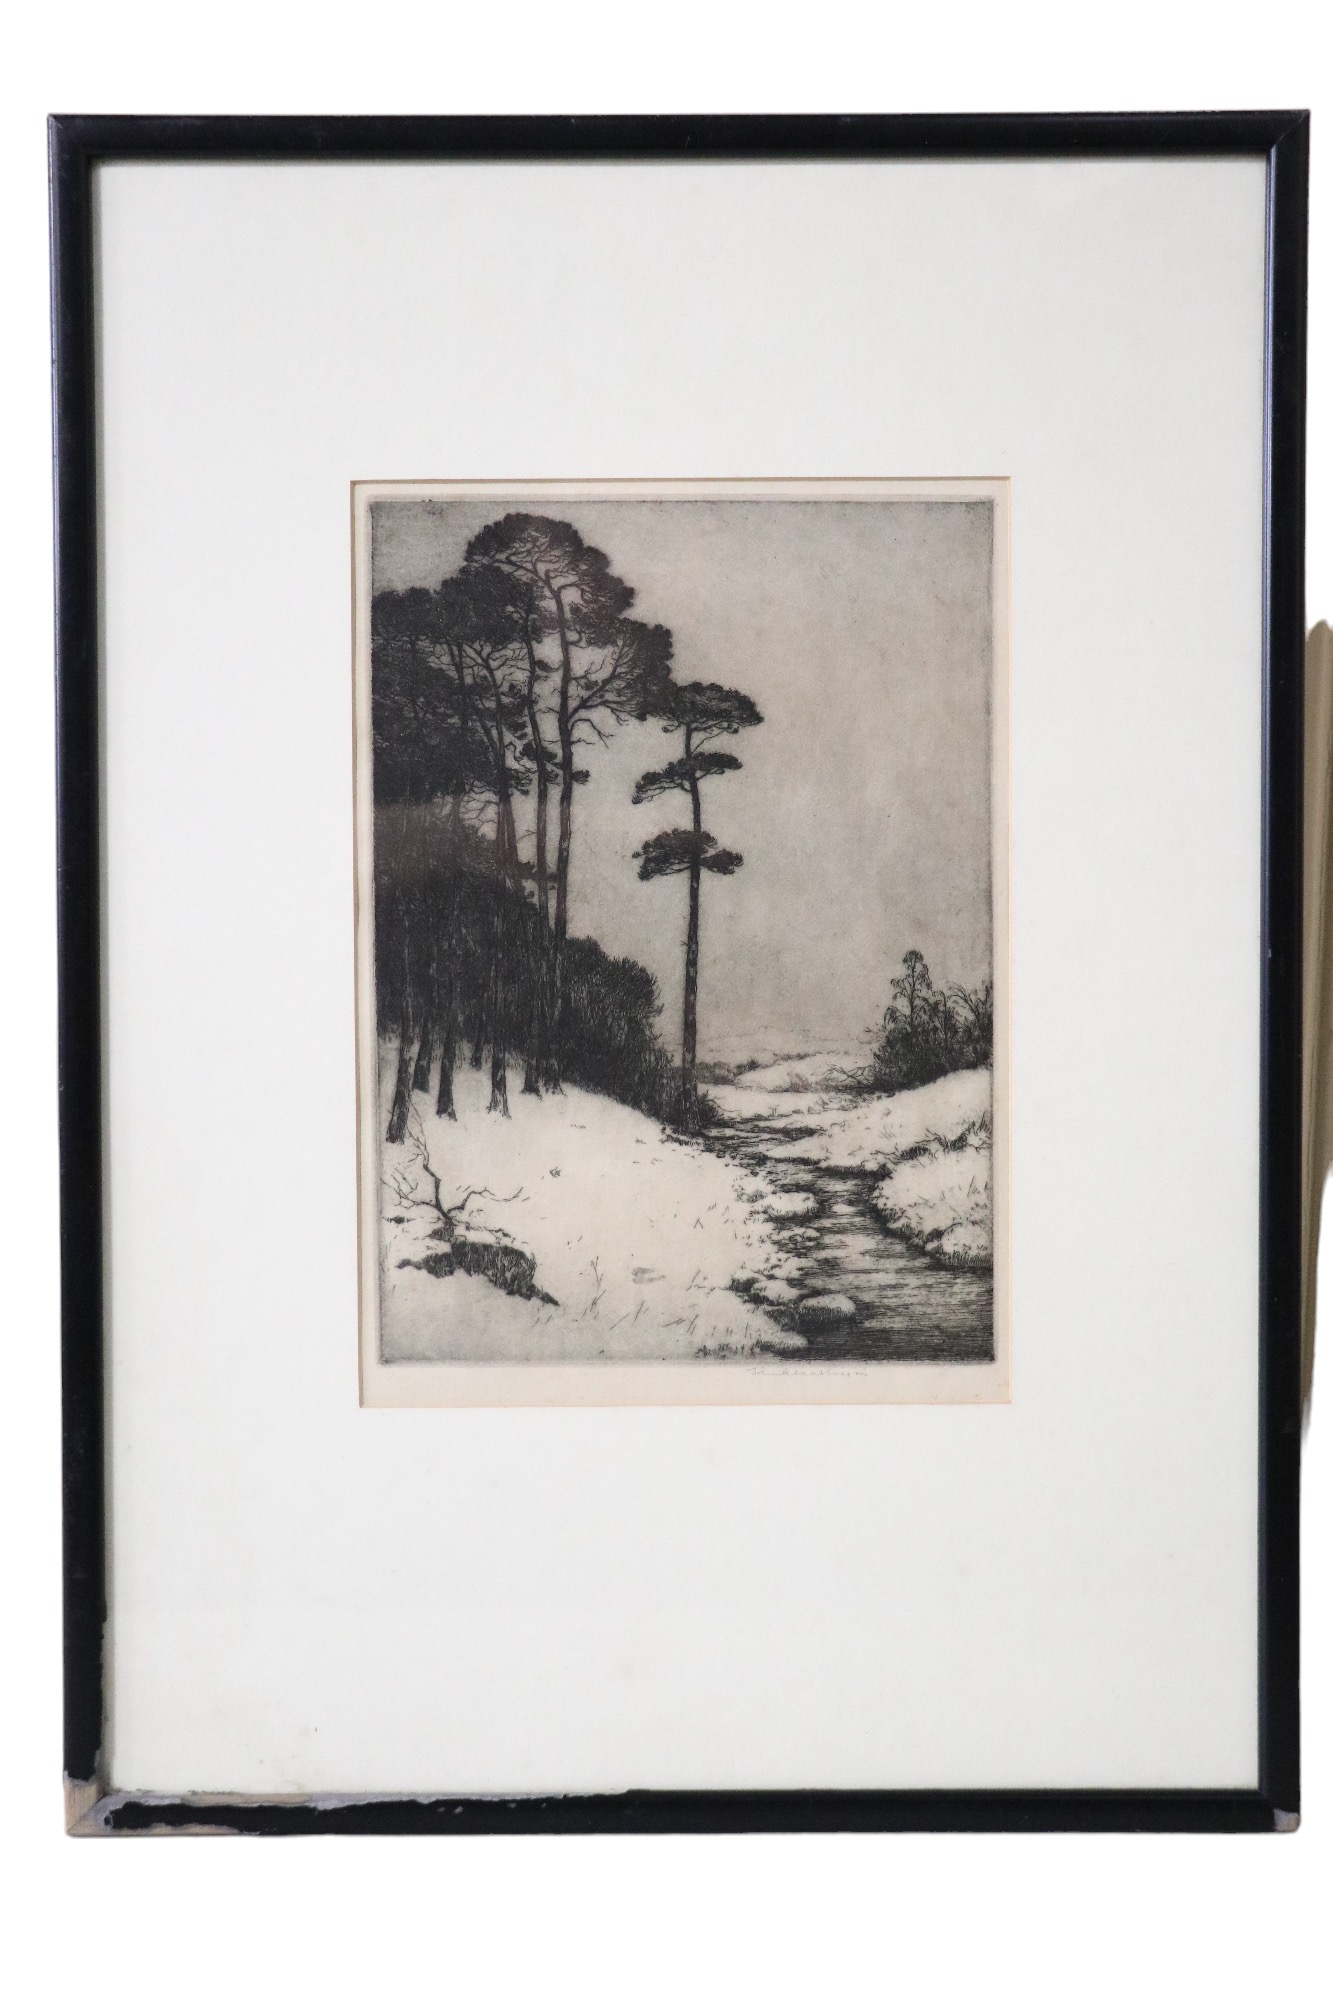 John George Mathieson (Scottish, exh 1918-1940) "Trees Doune", a rural study of towering pines - Image 2 of 2